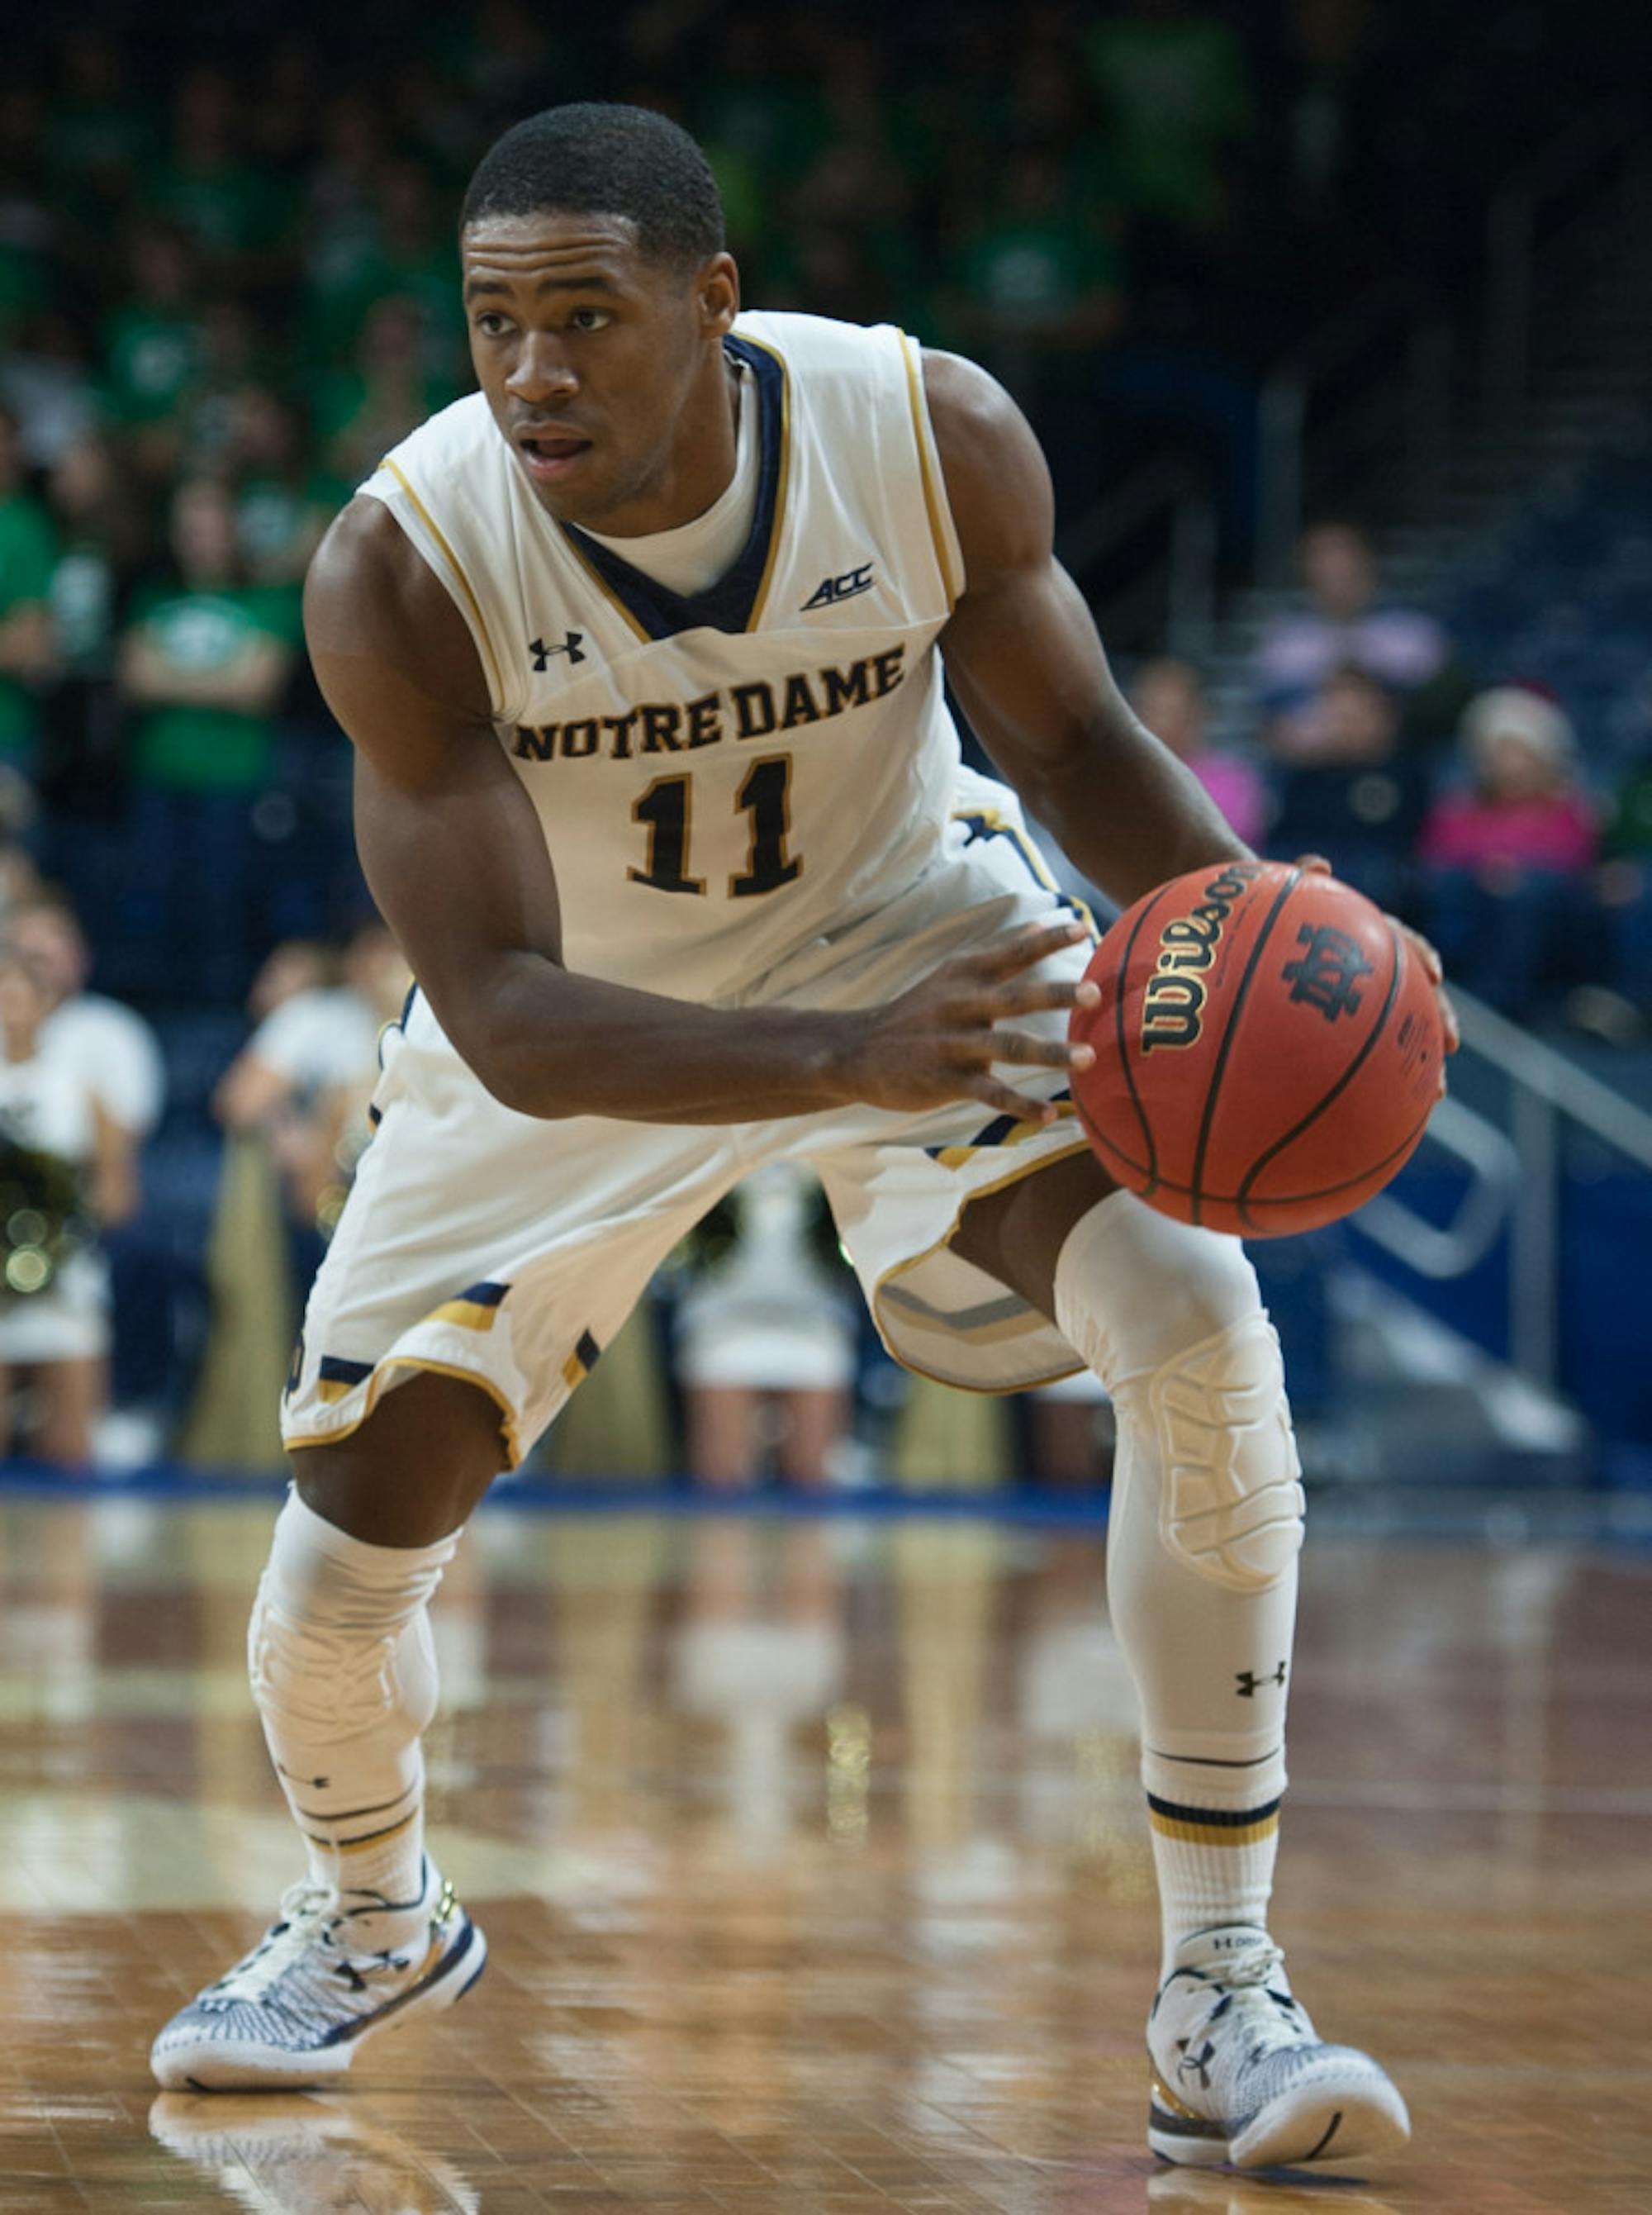 Irish sophomore guard Demetrius Jackson cuts towards the basket during Notre Dame’s 93-67 win over Mount St. Mary’s on Dec. 8.